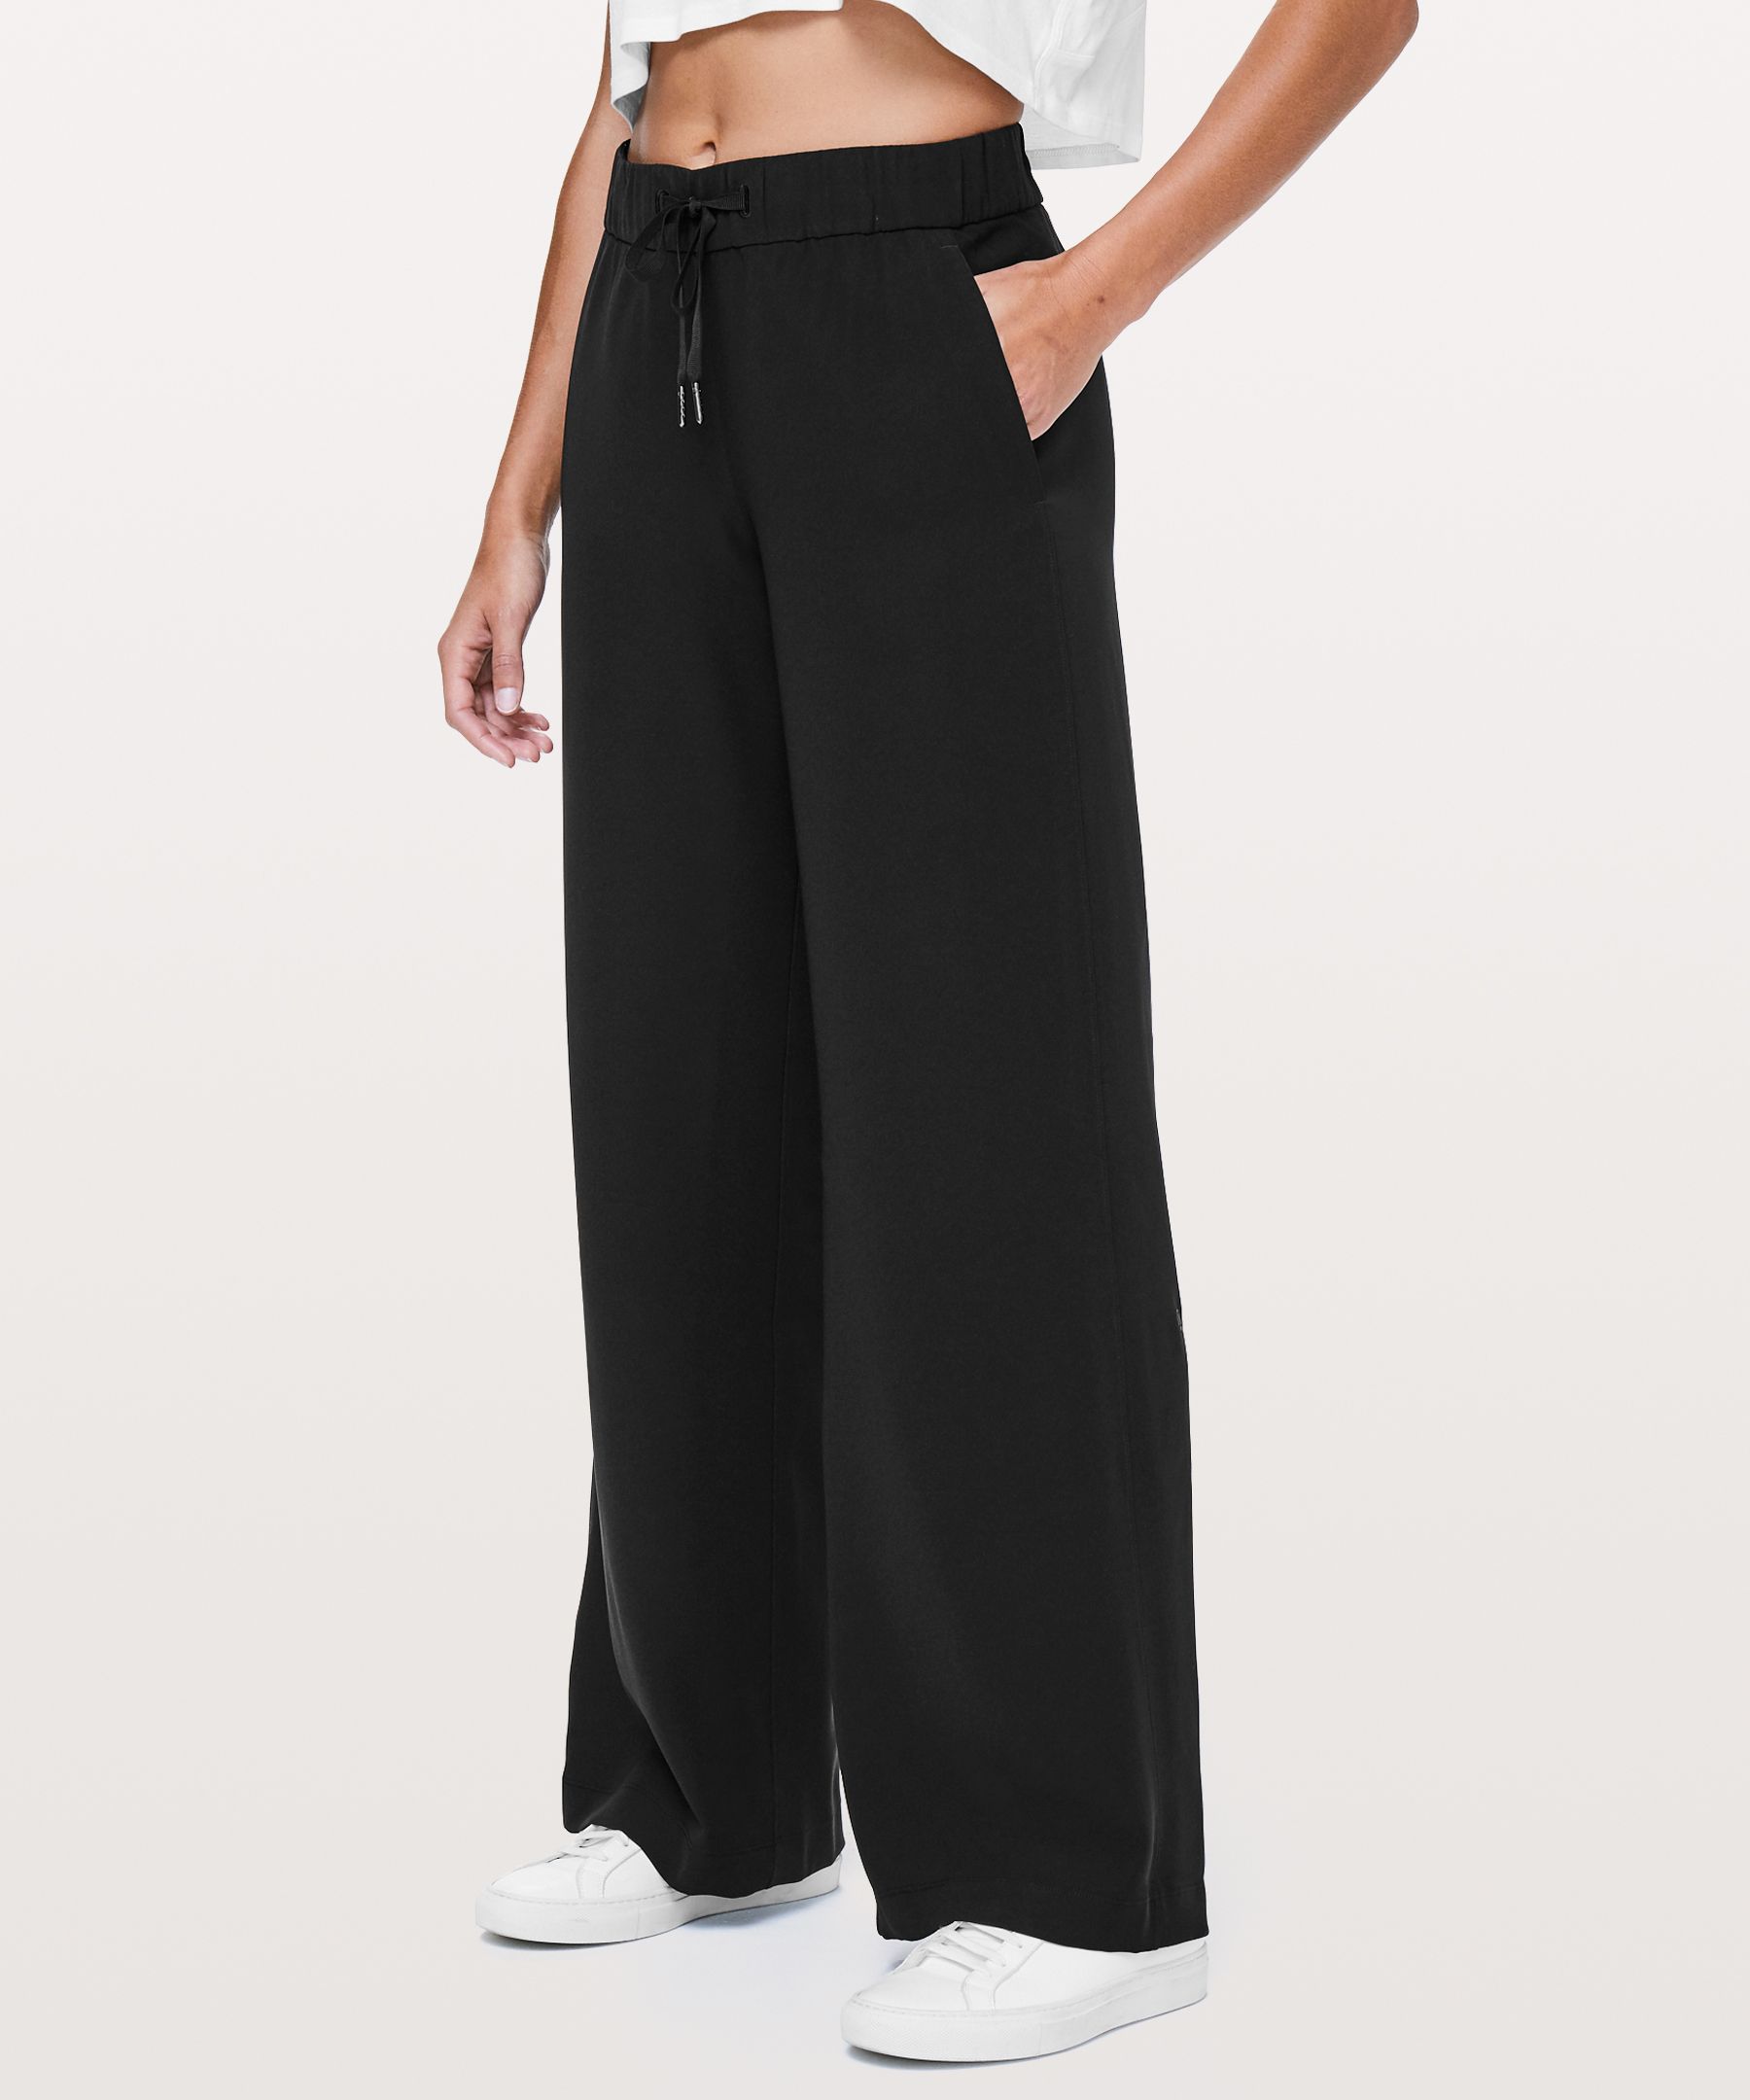 Lululemon on the fly 7/8 woven wide leg pants size 0 black - $72 New With  Tags - From Ava